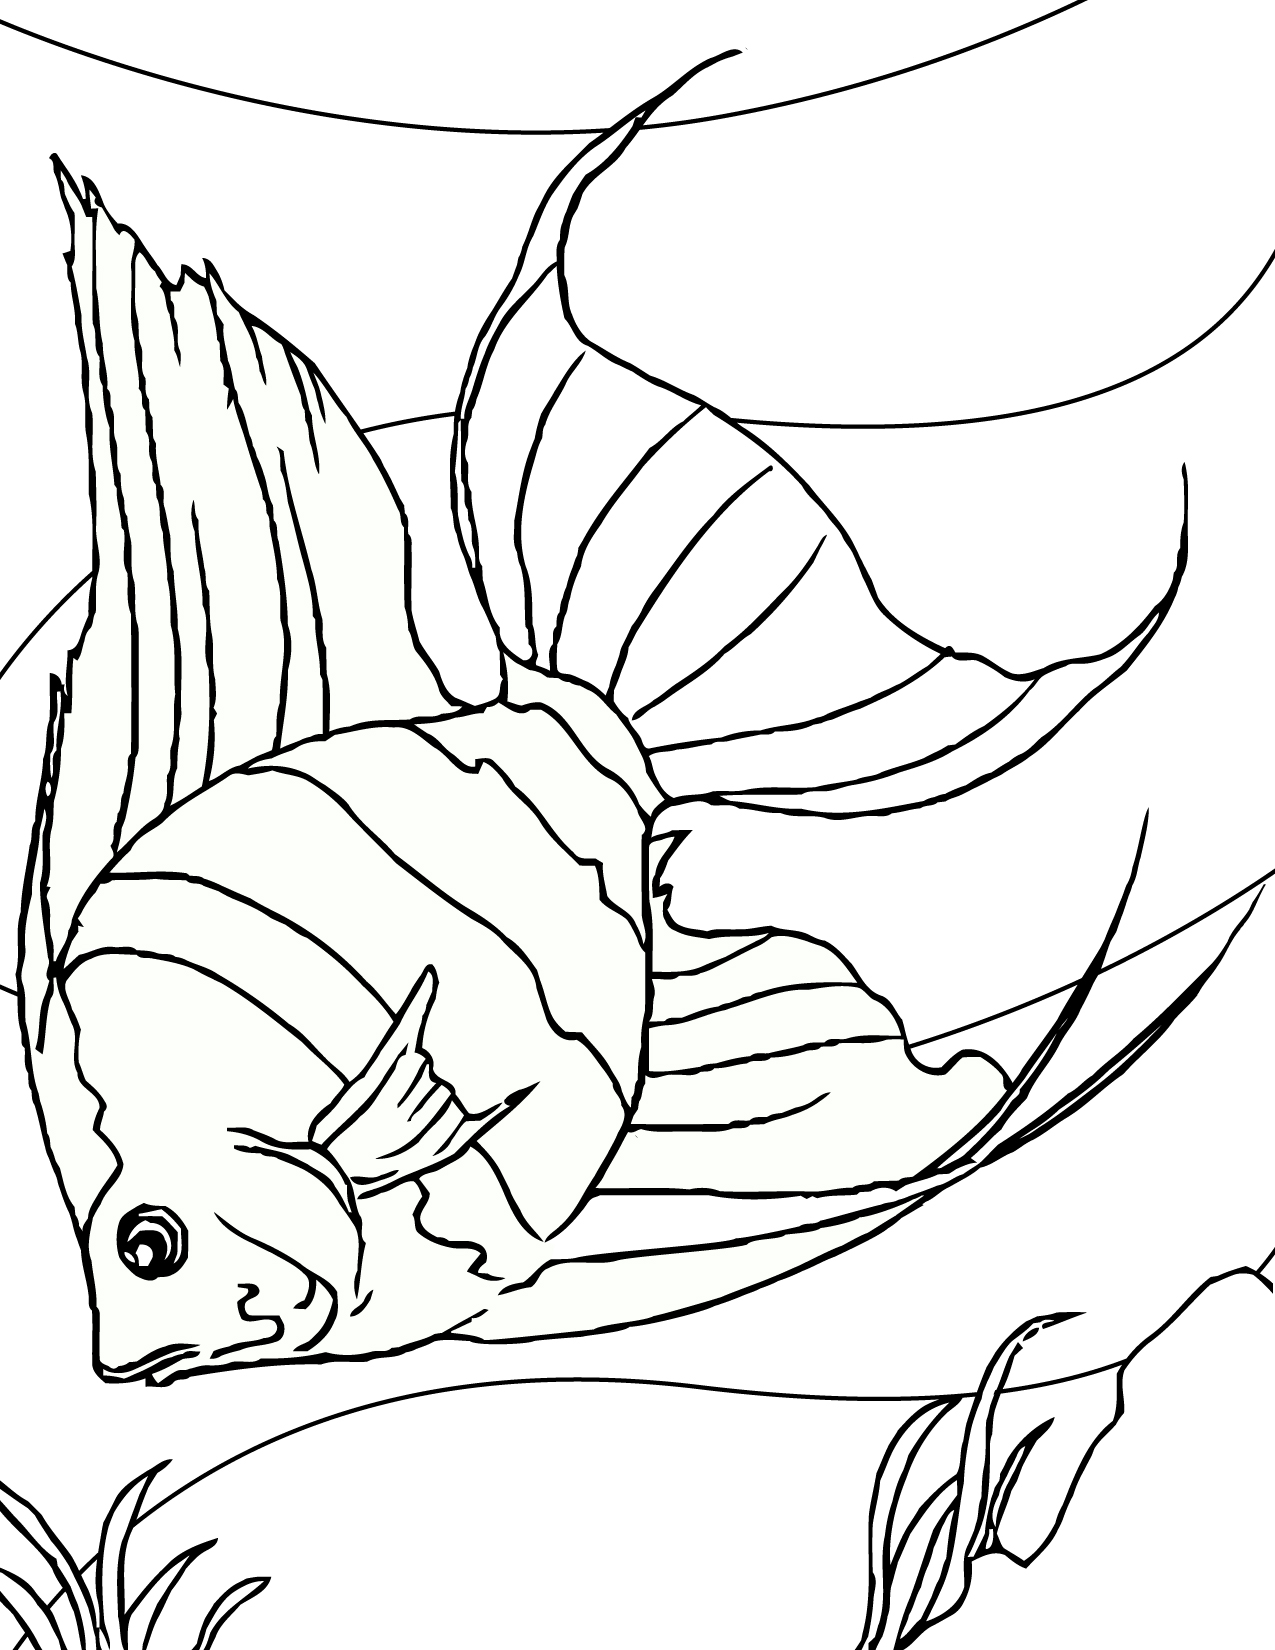 Fish Coloring Sheets For Kids Easy To Draw And Color Fish Coloring ...